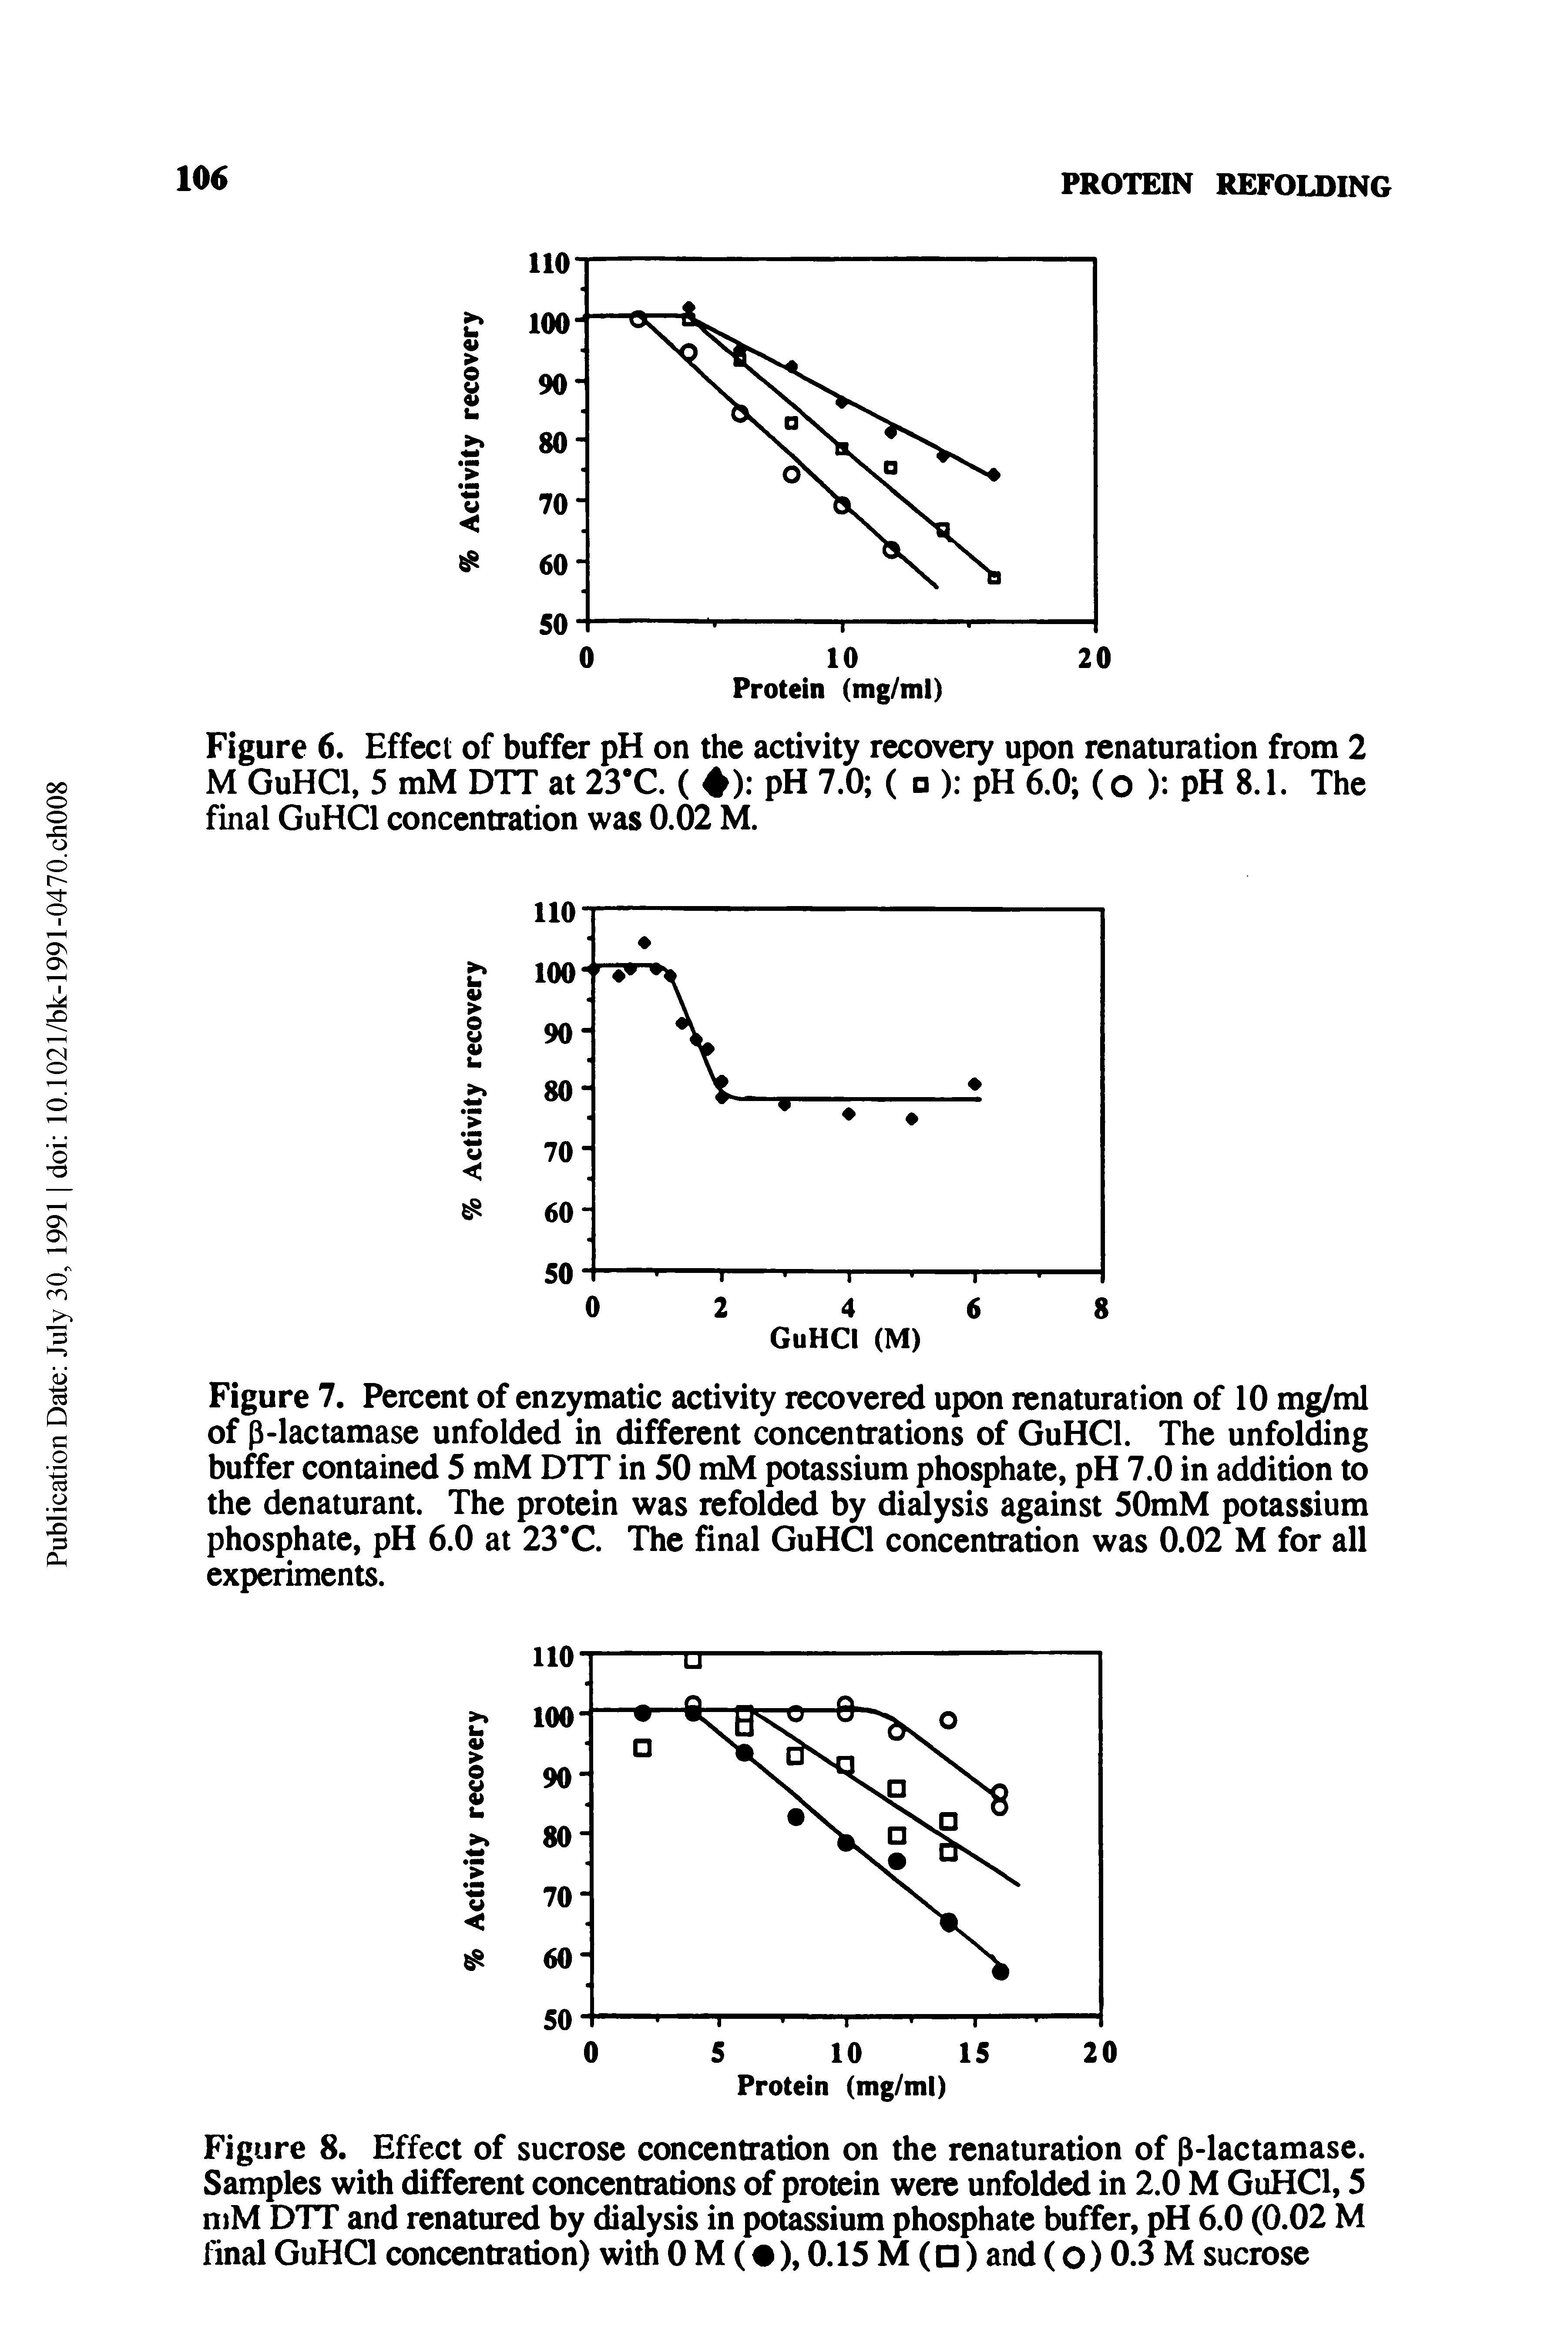 Figure 7. Percent of enzymatic activity recovered upon renaturation of 10 mg/ml of p-lactamase unfolded in different concentrations of GuHCl. The unfolding buffer contained 5 mM DTT in 50 mM potassium phosphate, pH 7.0 in addition to the denaturant. The protein was refolded by didysis against 50mM potassium phosphate, pH 6.0 at 23 C. The final GuHCl concentration was 0.02 M for all experiments.